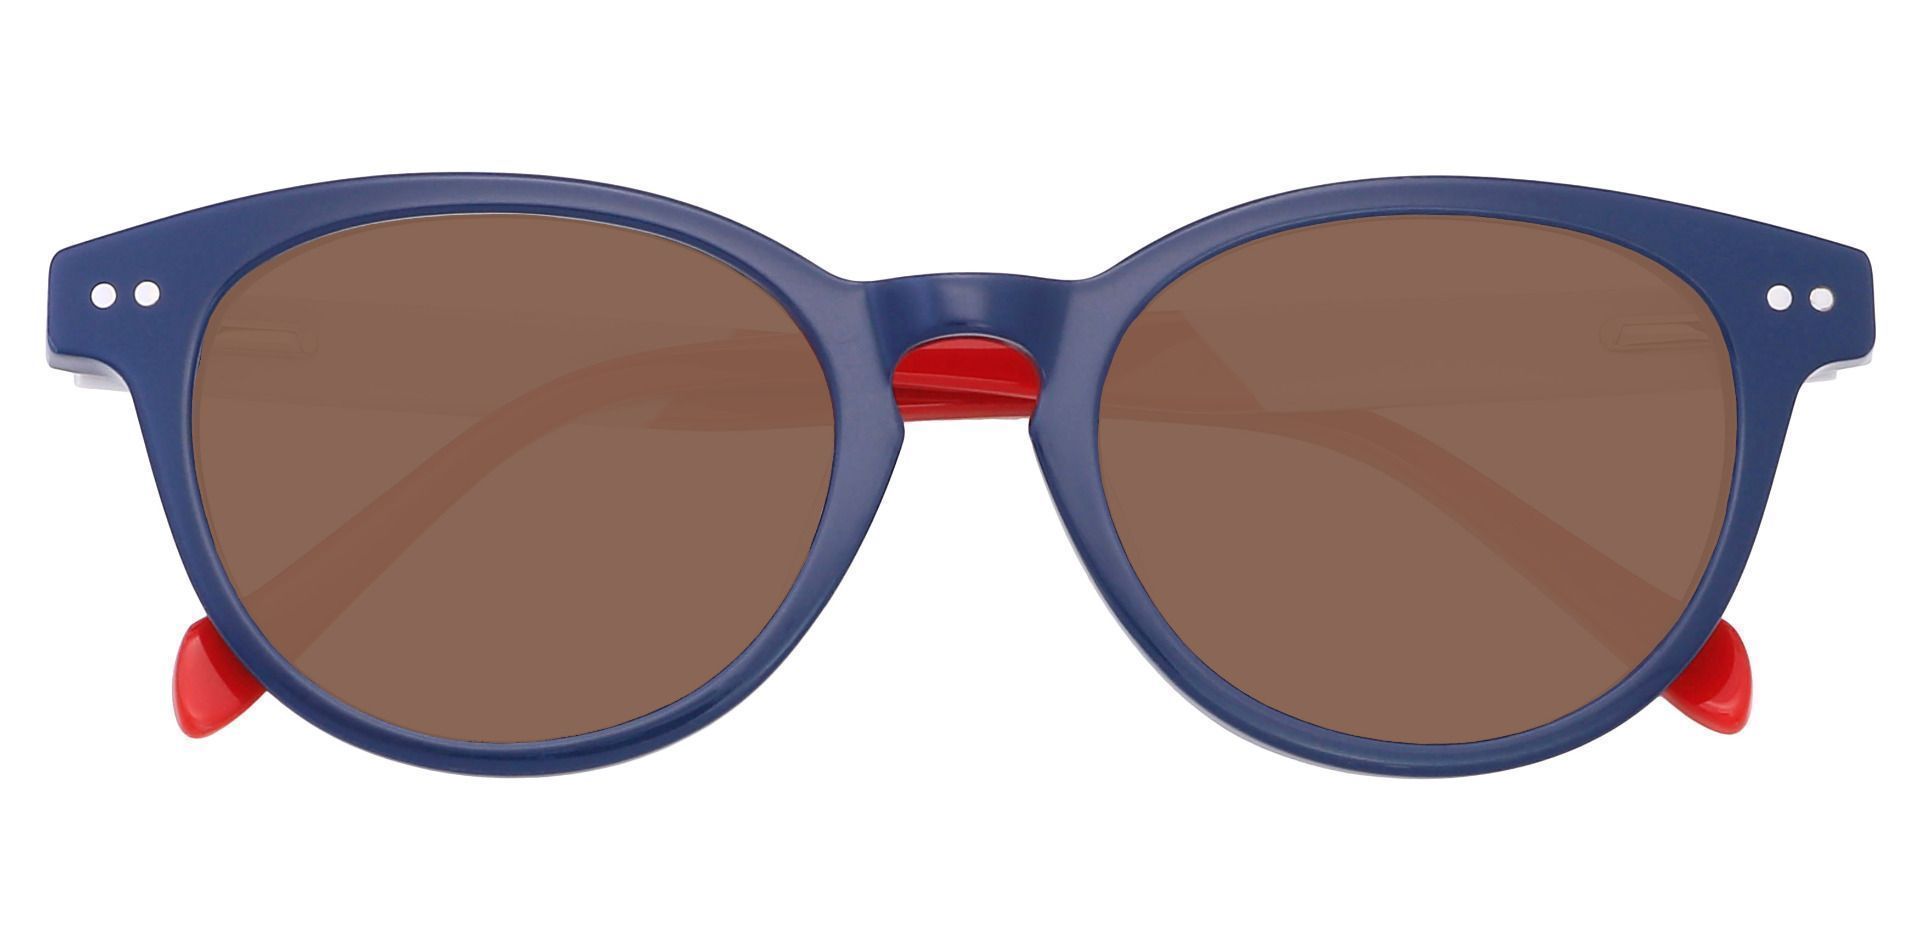 Revere Oval Lined Bifocal Sunglasses - Blue Frame With Brown Lenses